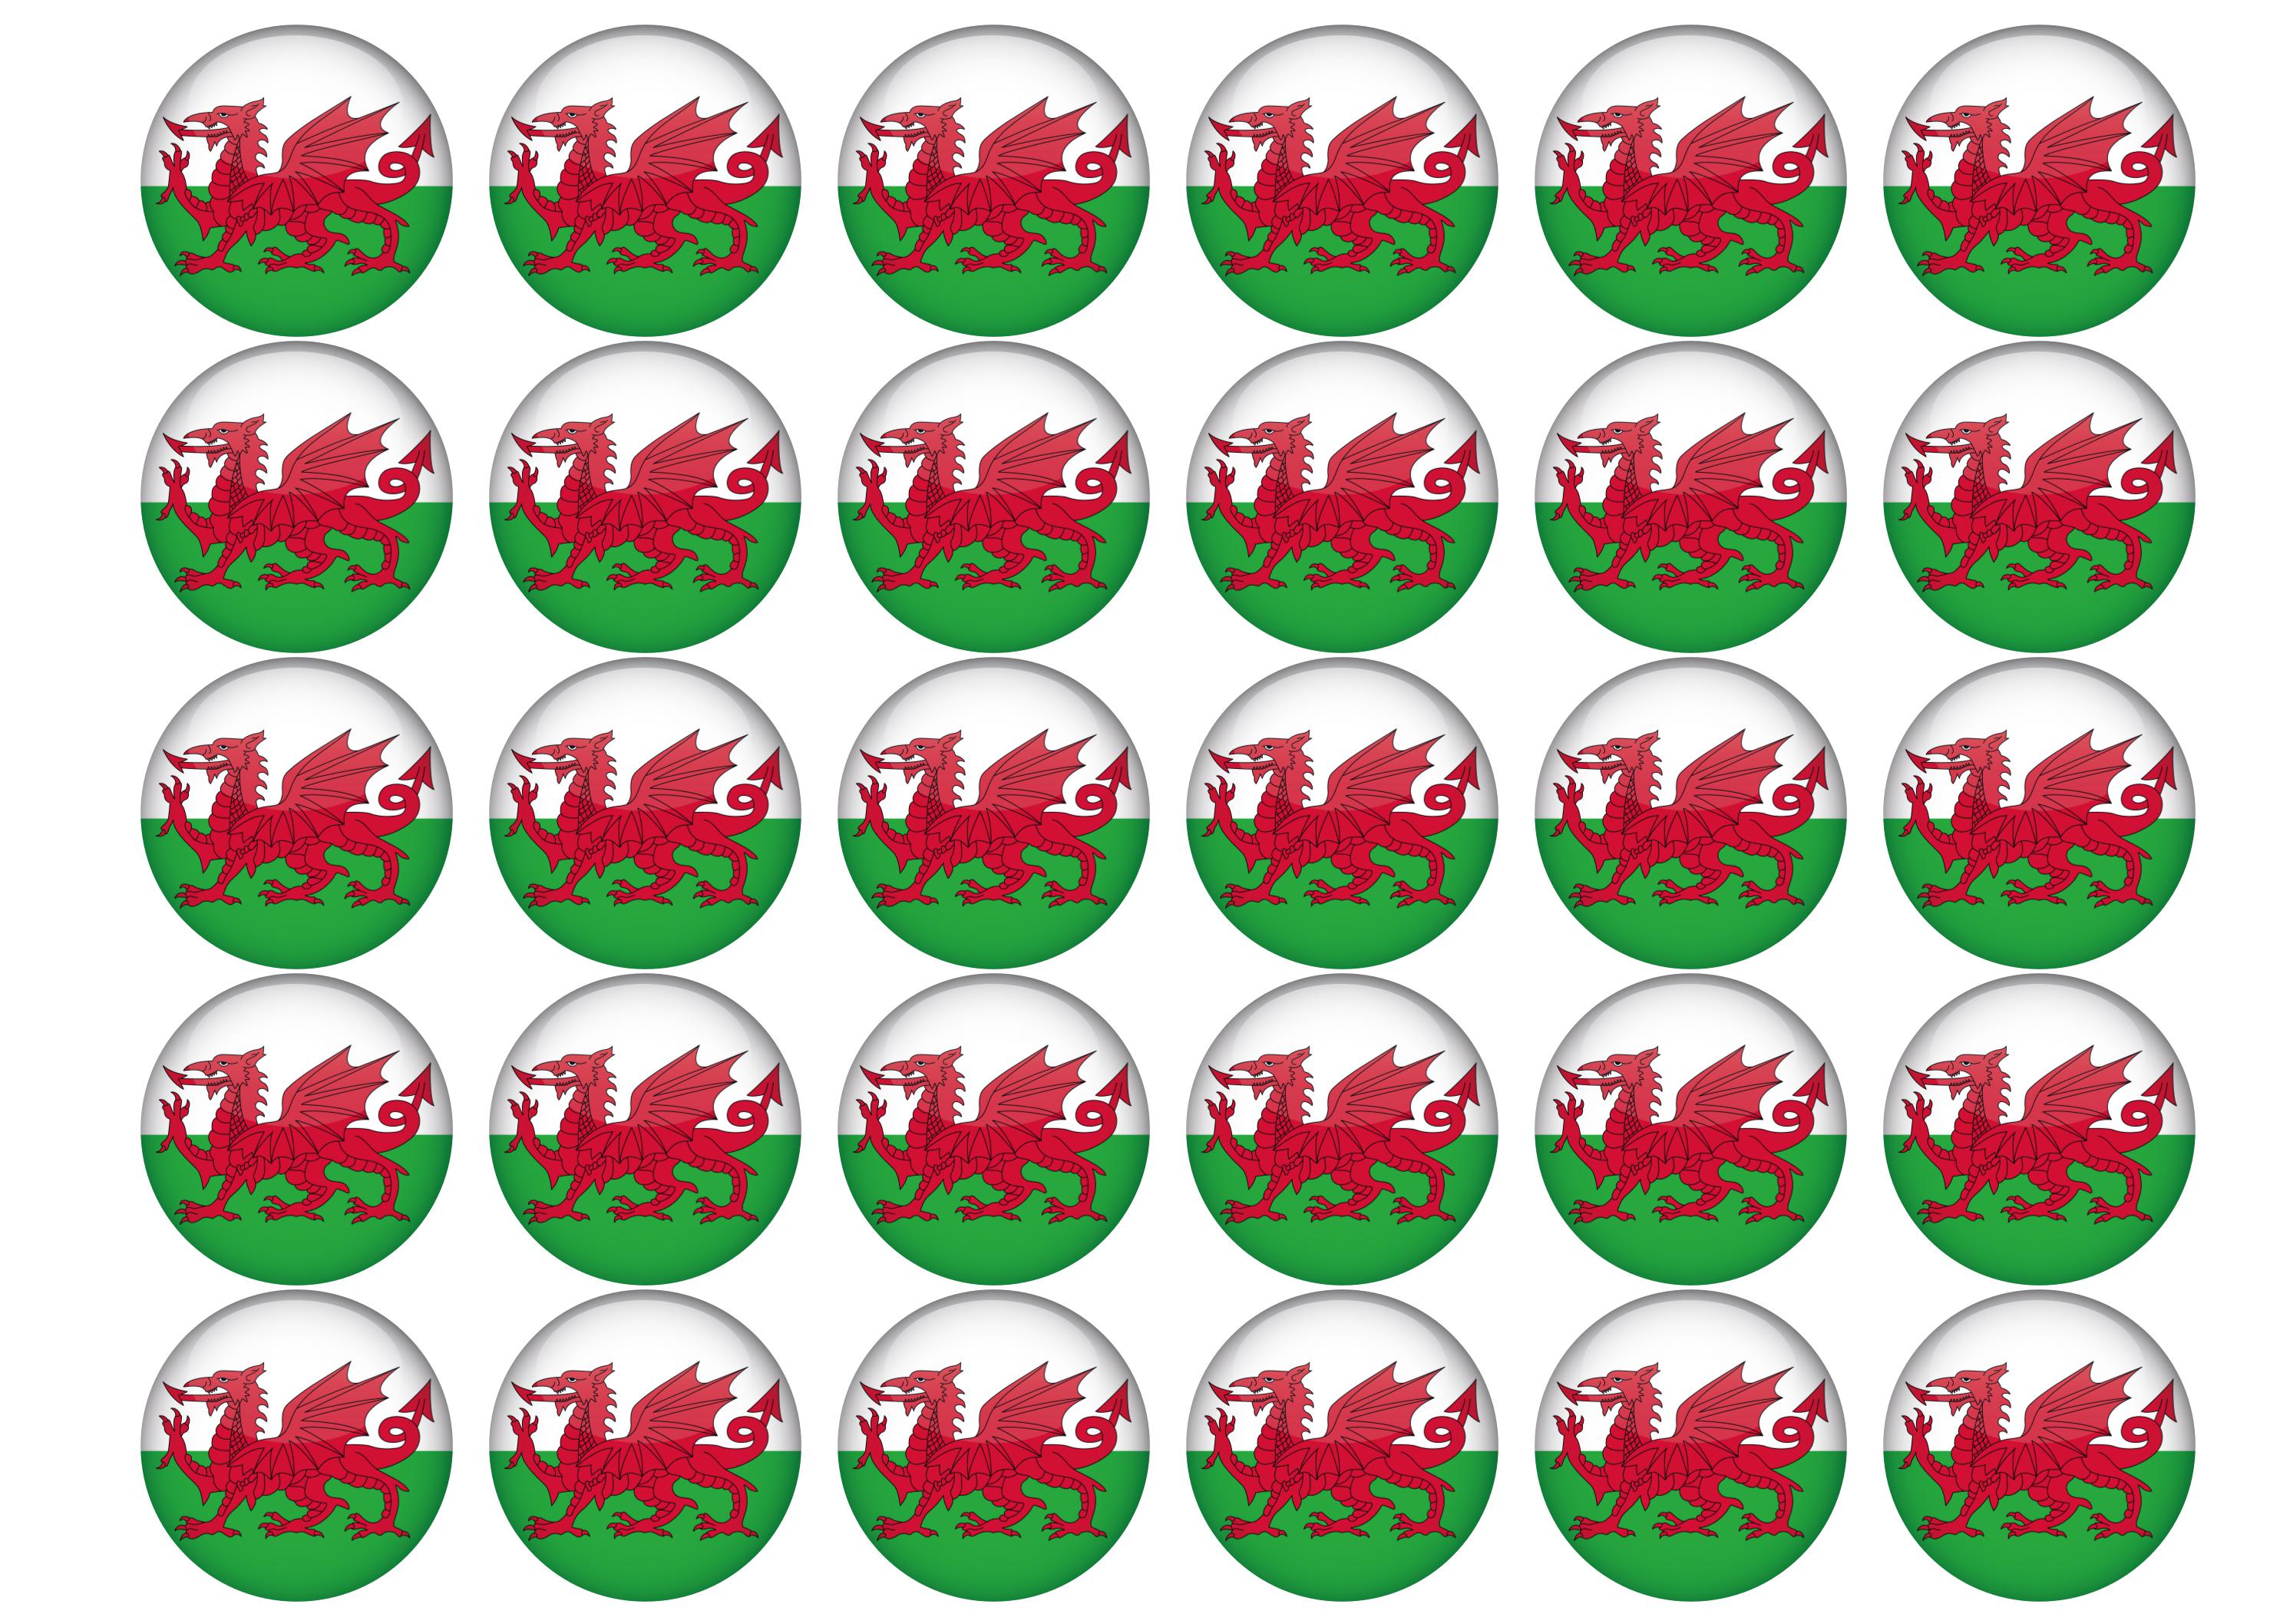 30 edible toppers with the flag of Wales